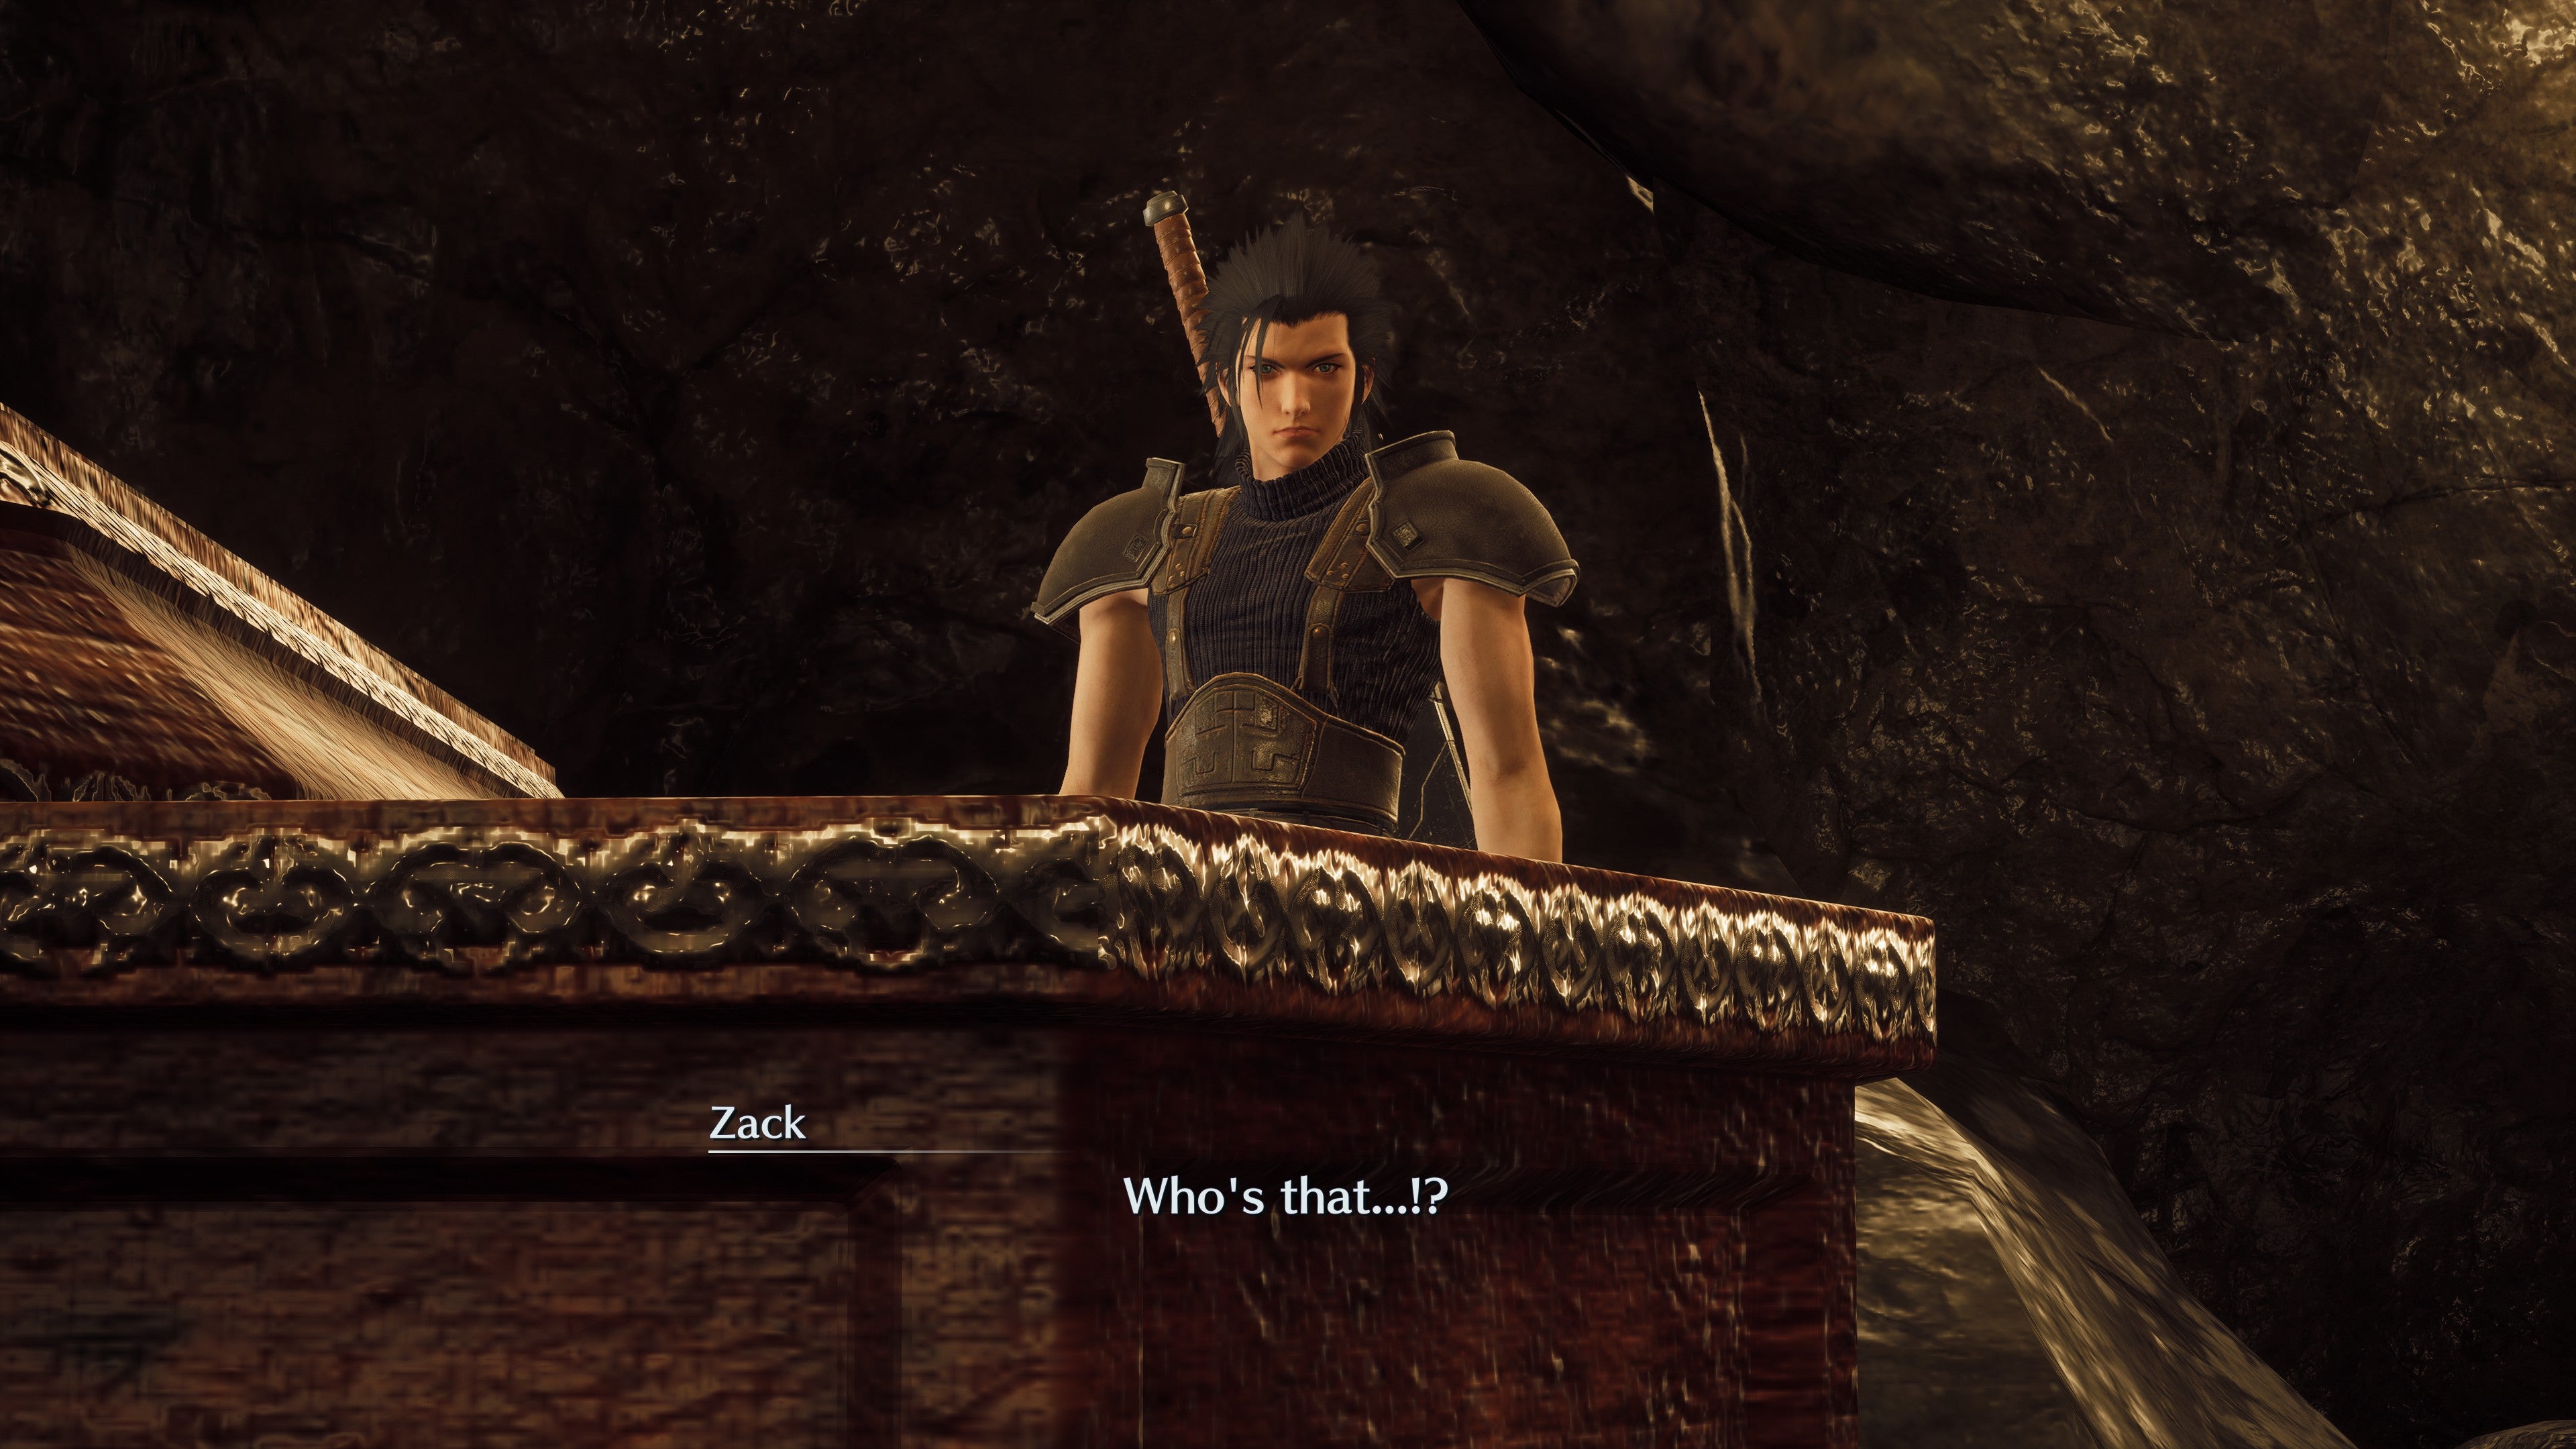 Zack looks down into a coffin in Crisis Core - Final Fantasy VII - Reunion with a surprised expression on his face.